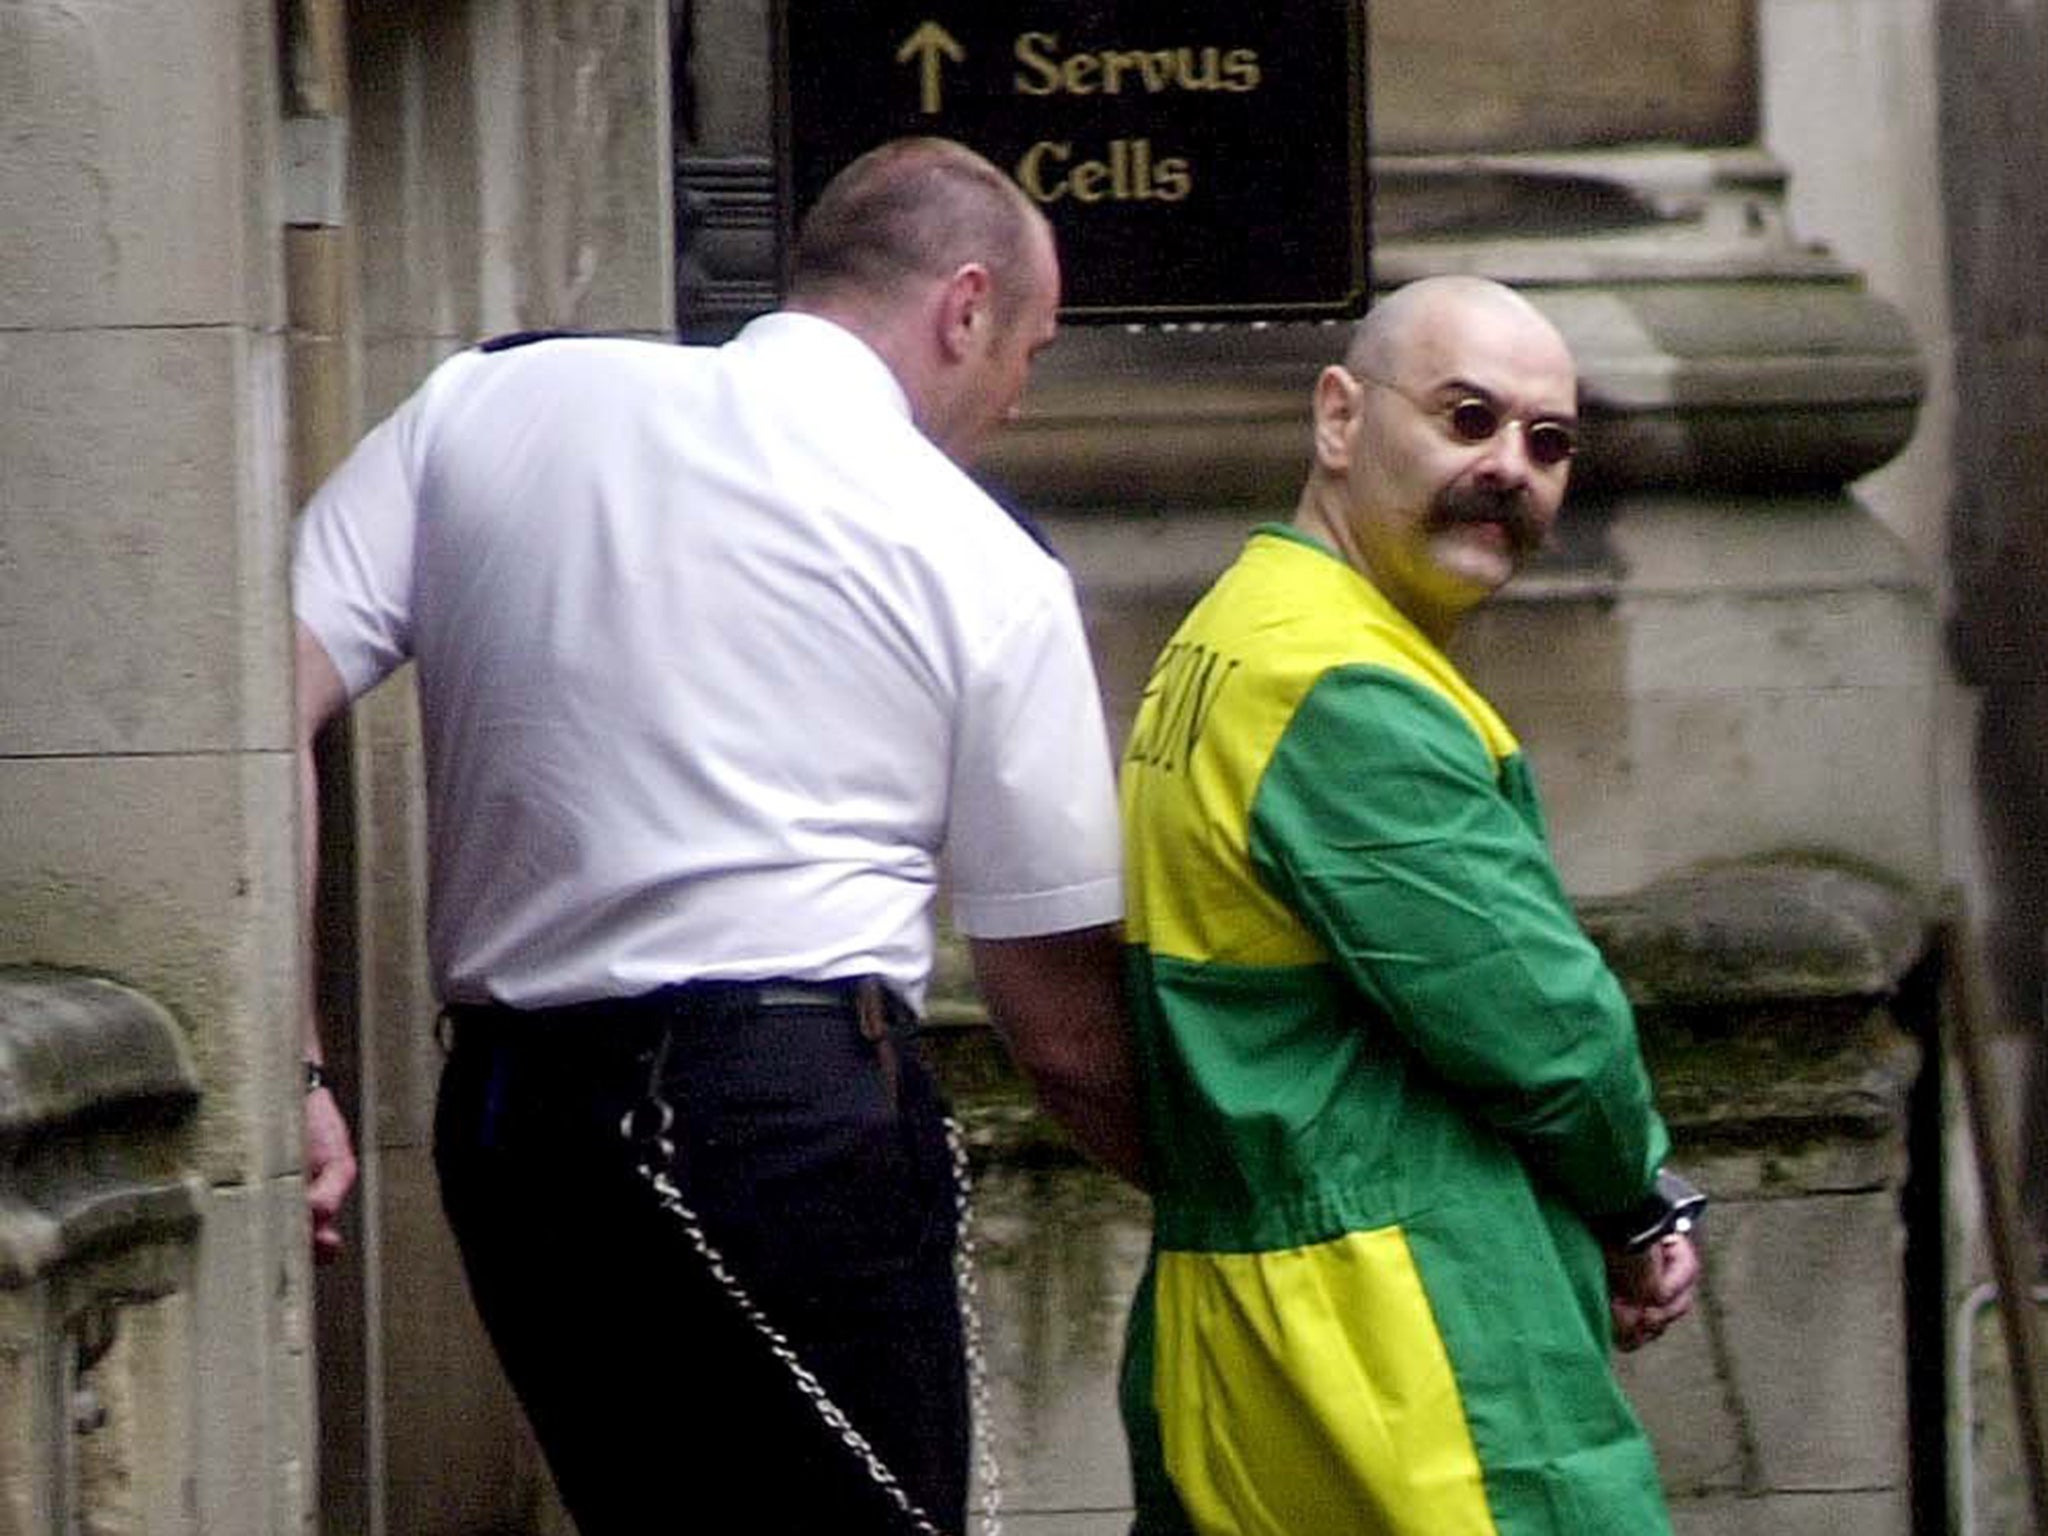 Who is Charles Bronson? Life and crimes of one of UK’s longest serving